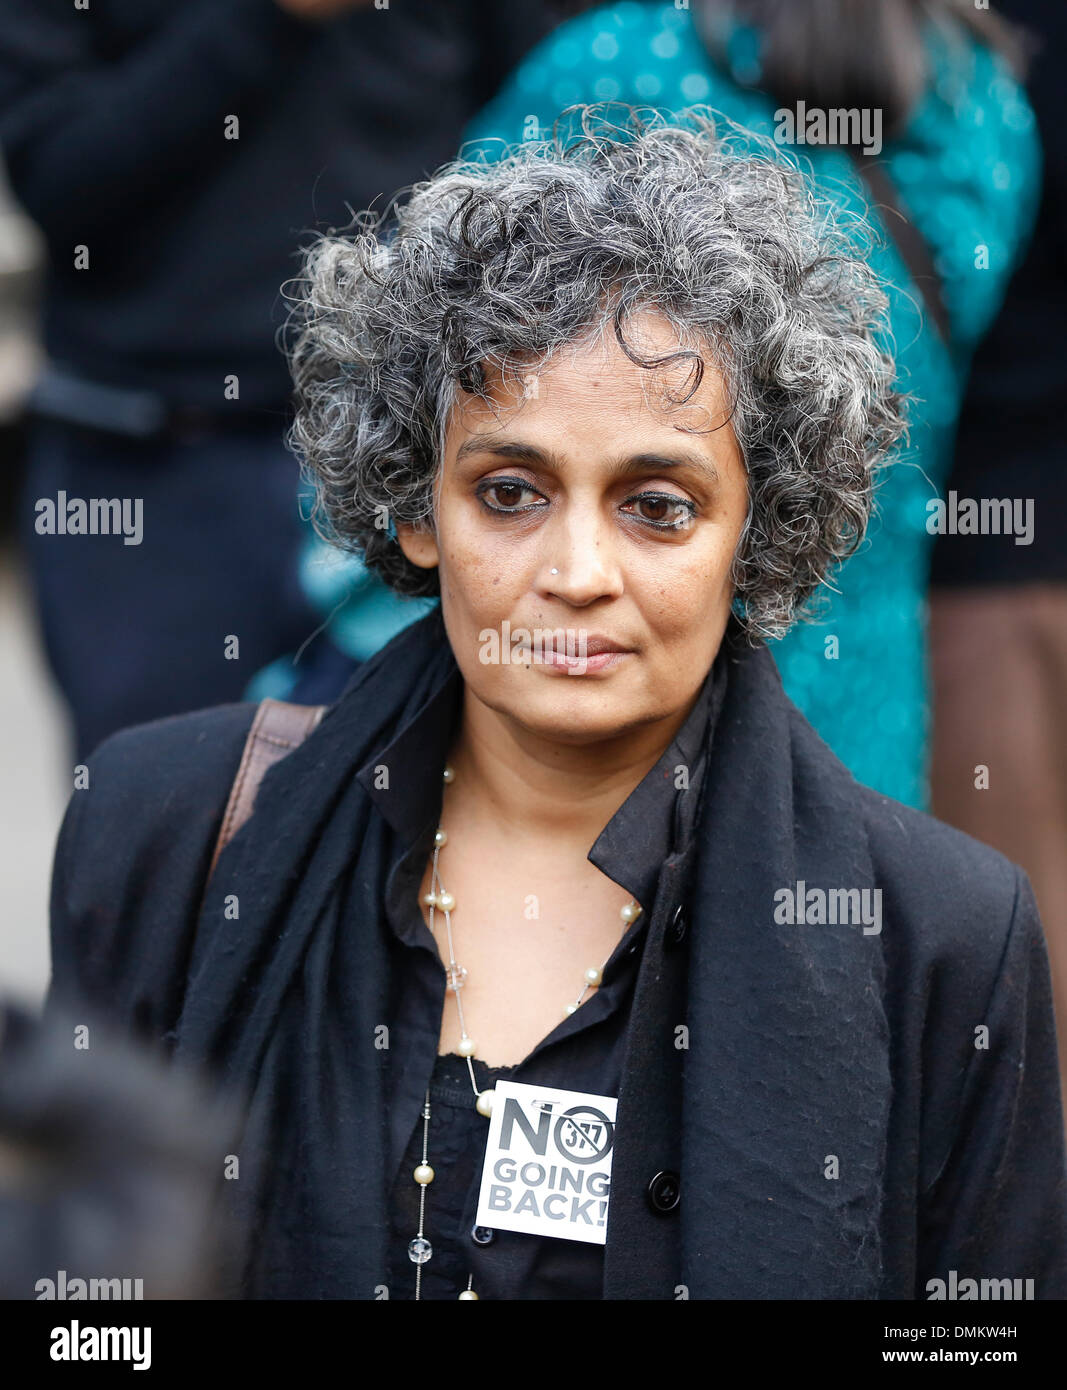 Delhi, India. 15th Dec 2013. Author and political activist Arundhati Roy at the event. Delhi’s LGBT community observed a 'Day of Rage' and came out in huge numbers to protest against the Supreme Courts December 11, 2013 ruling reinstating Section 377 of the Indian Penal Code, effectively making homosexuality a criminal offence. Credit:  Jiti Chadha/Alamy Live News Stock Photo